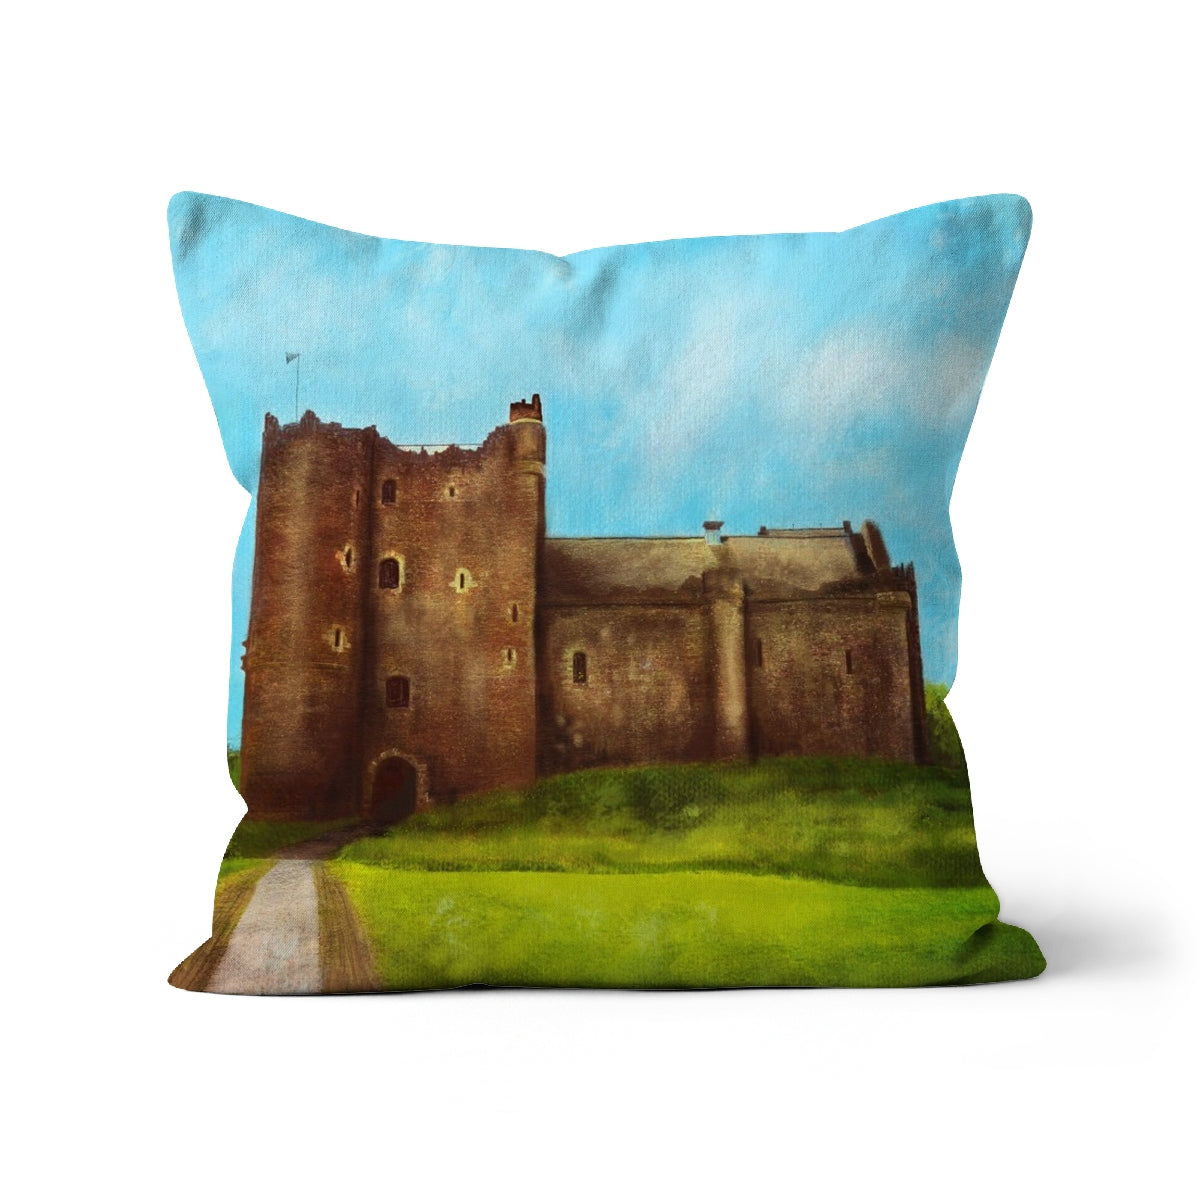 Doune Castle Art Gifts Cushion-Cushions-Historic & Iconic Scotland Art Gallery-Linen-18"x18"-Paintings, Prints, Homeware, Art Gifts From Scotland By Scottish Artist Kevin Hunter